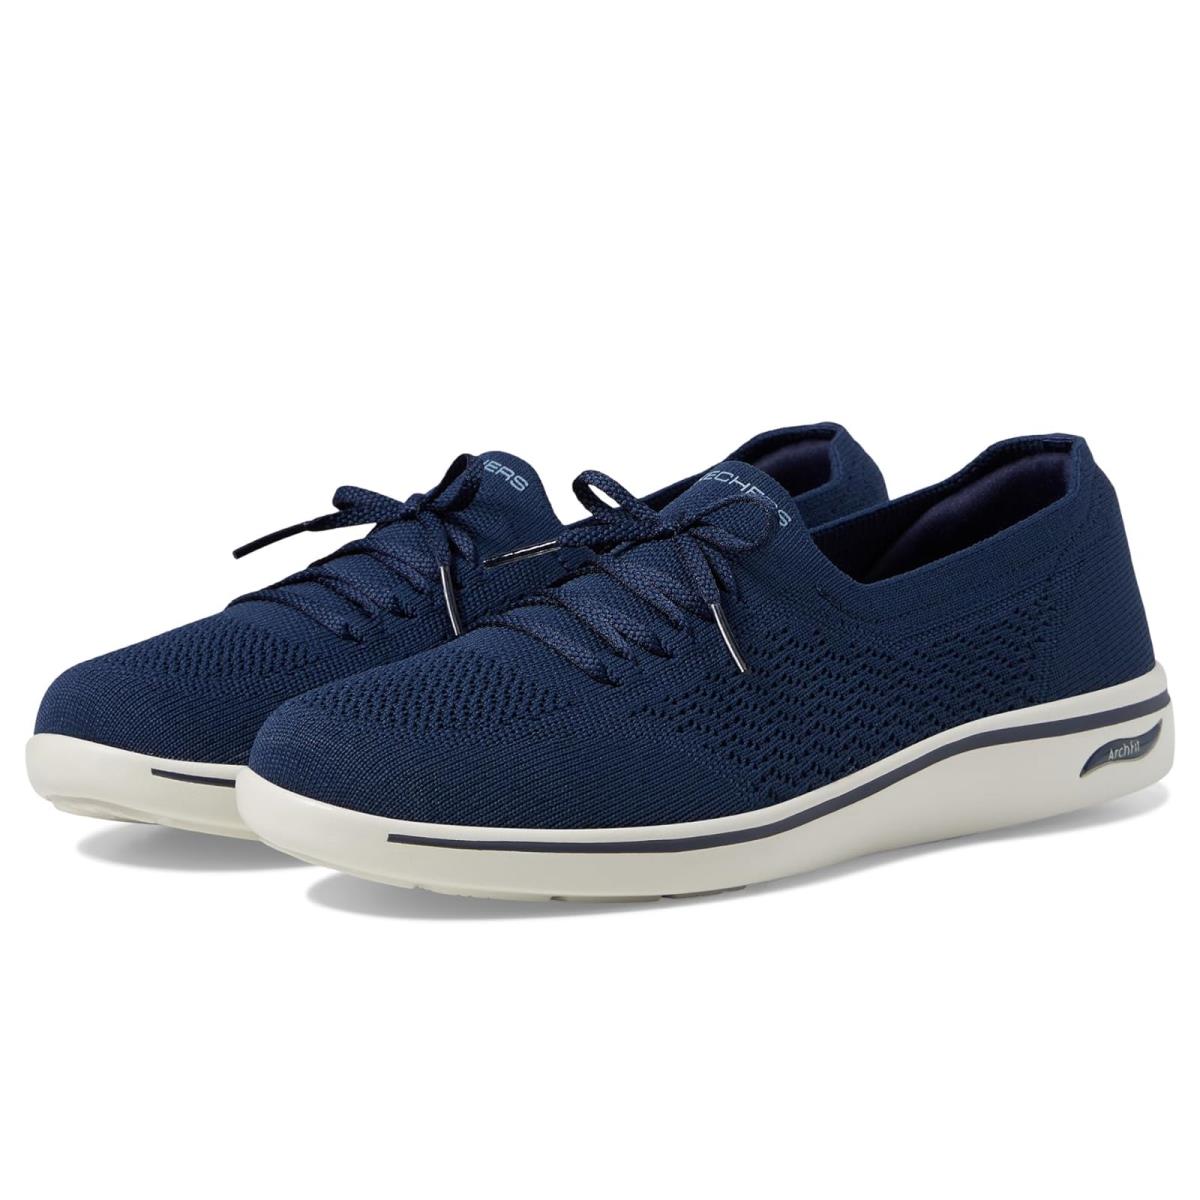 Woman`s Shoes Skechers Performance Arch Fit Uplift - Florence Navy